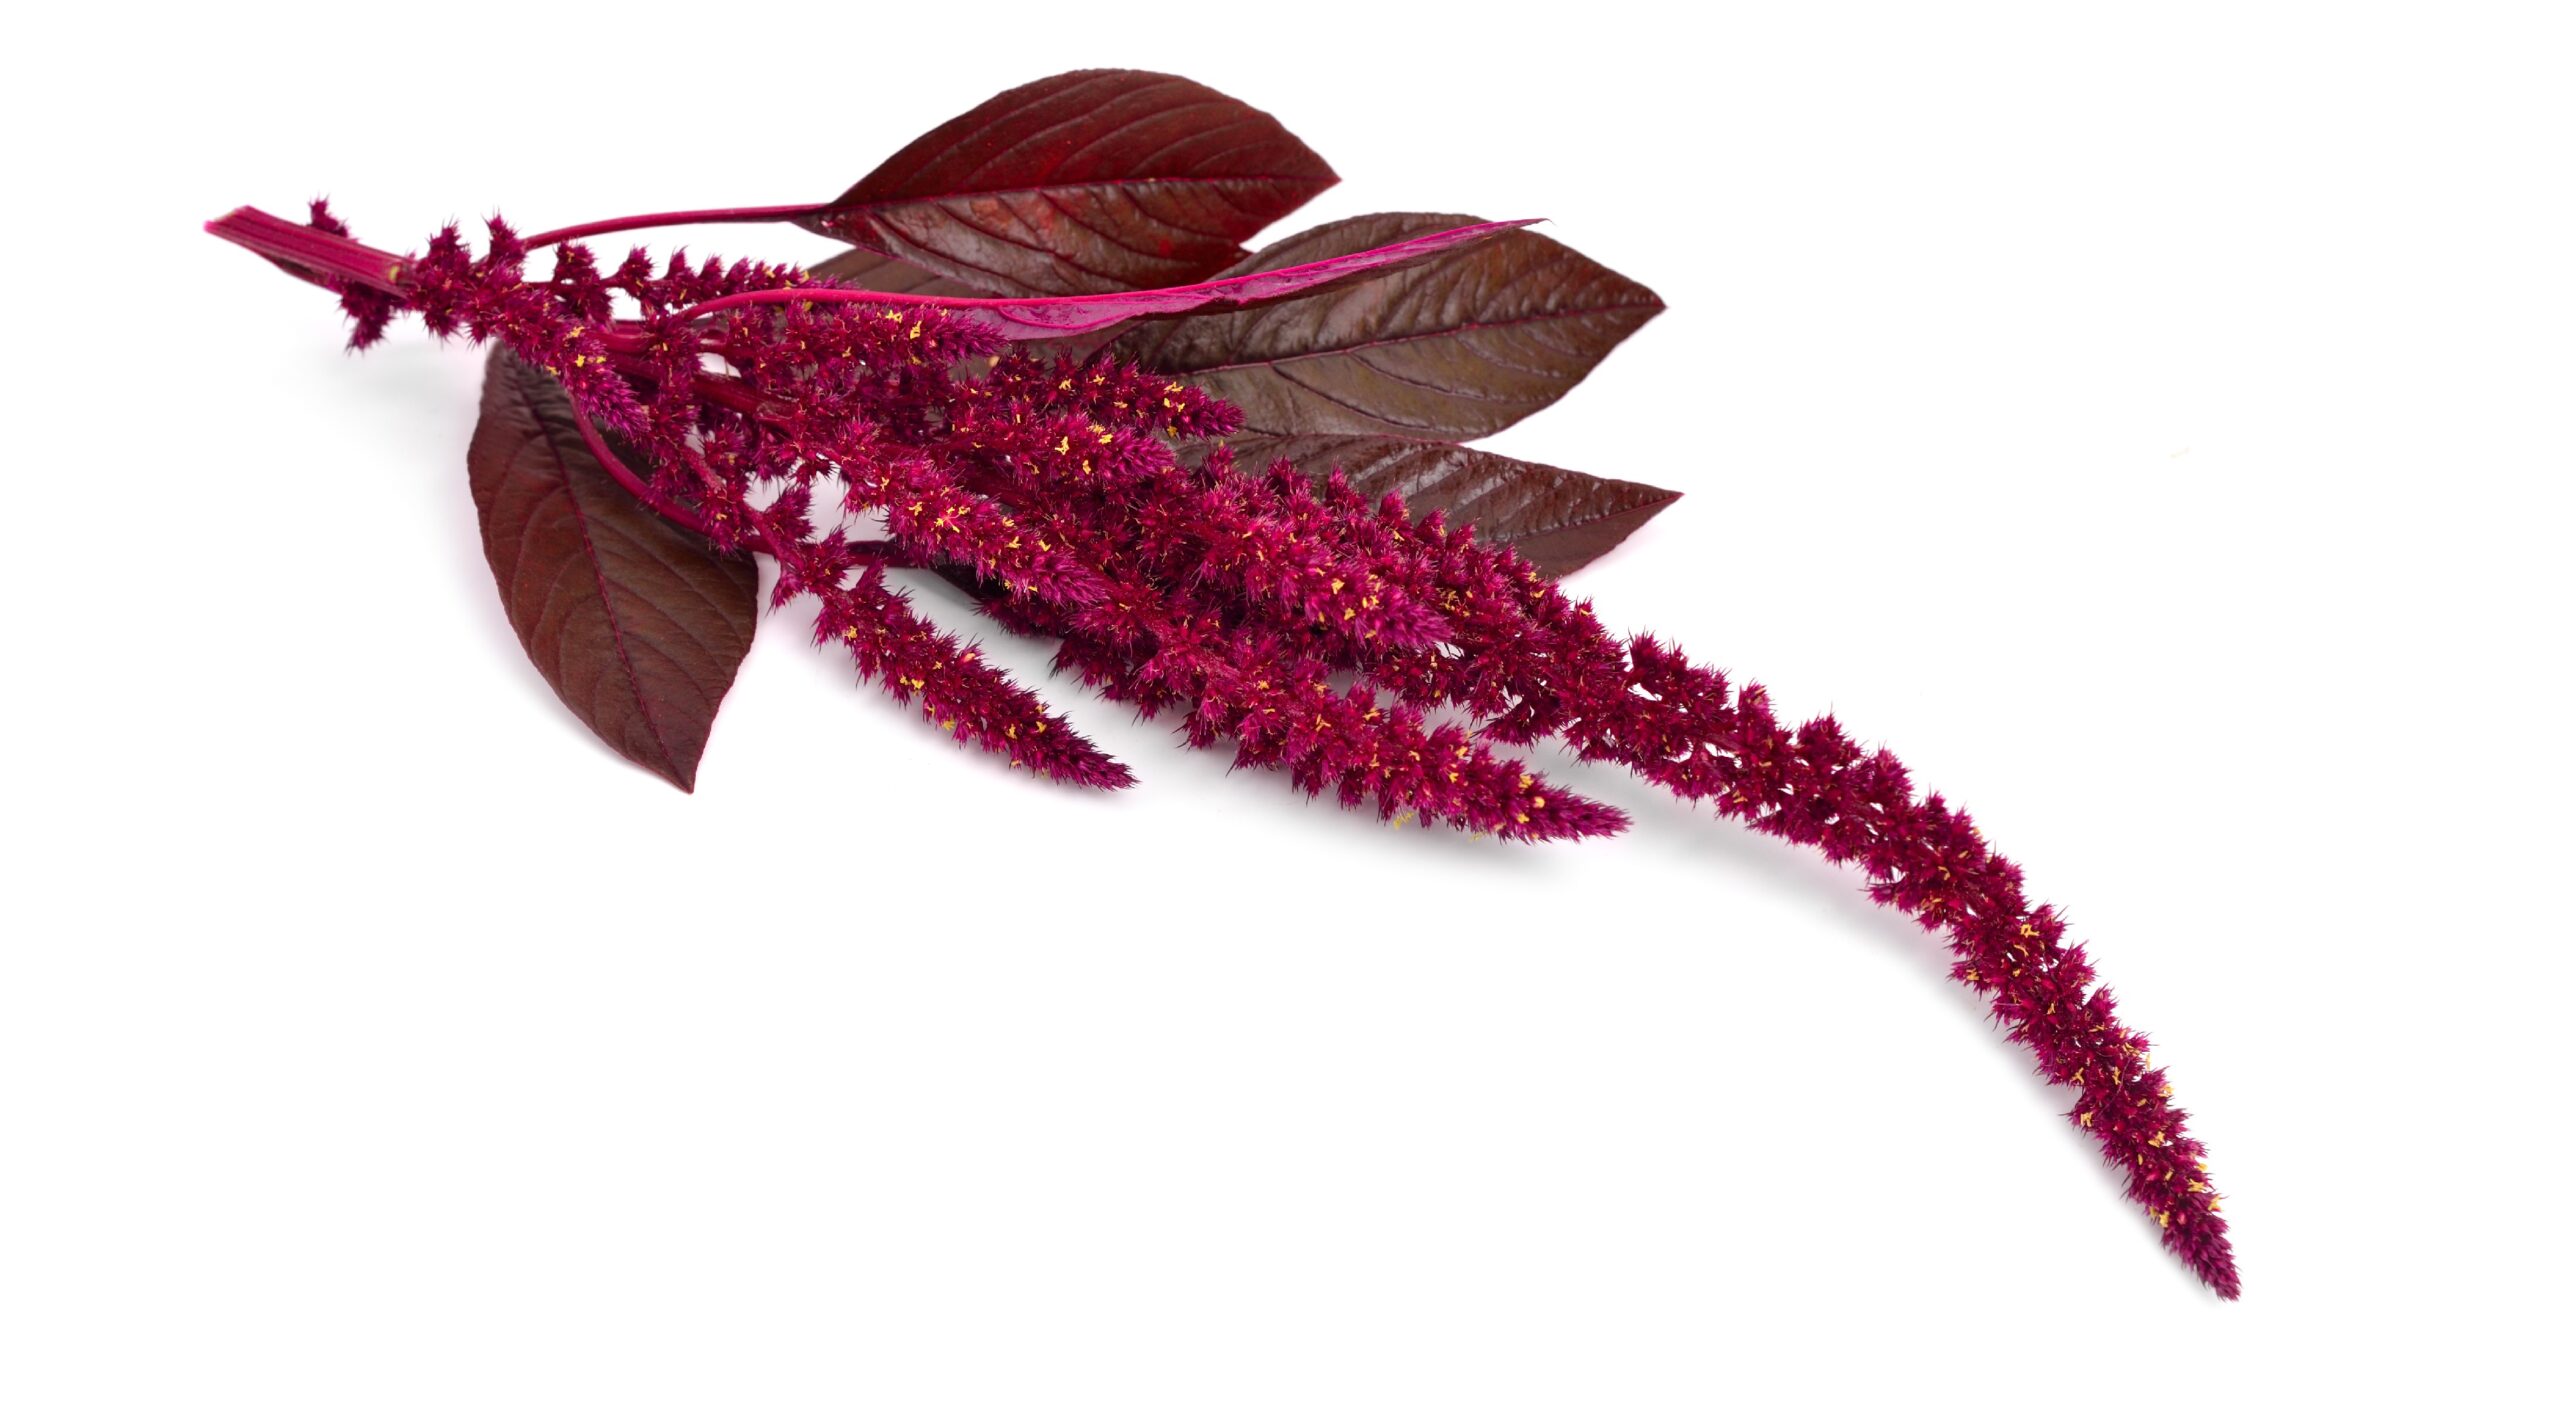 Amaranth as a supplier of natural food coloring – healing practice